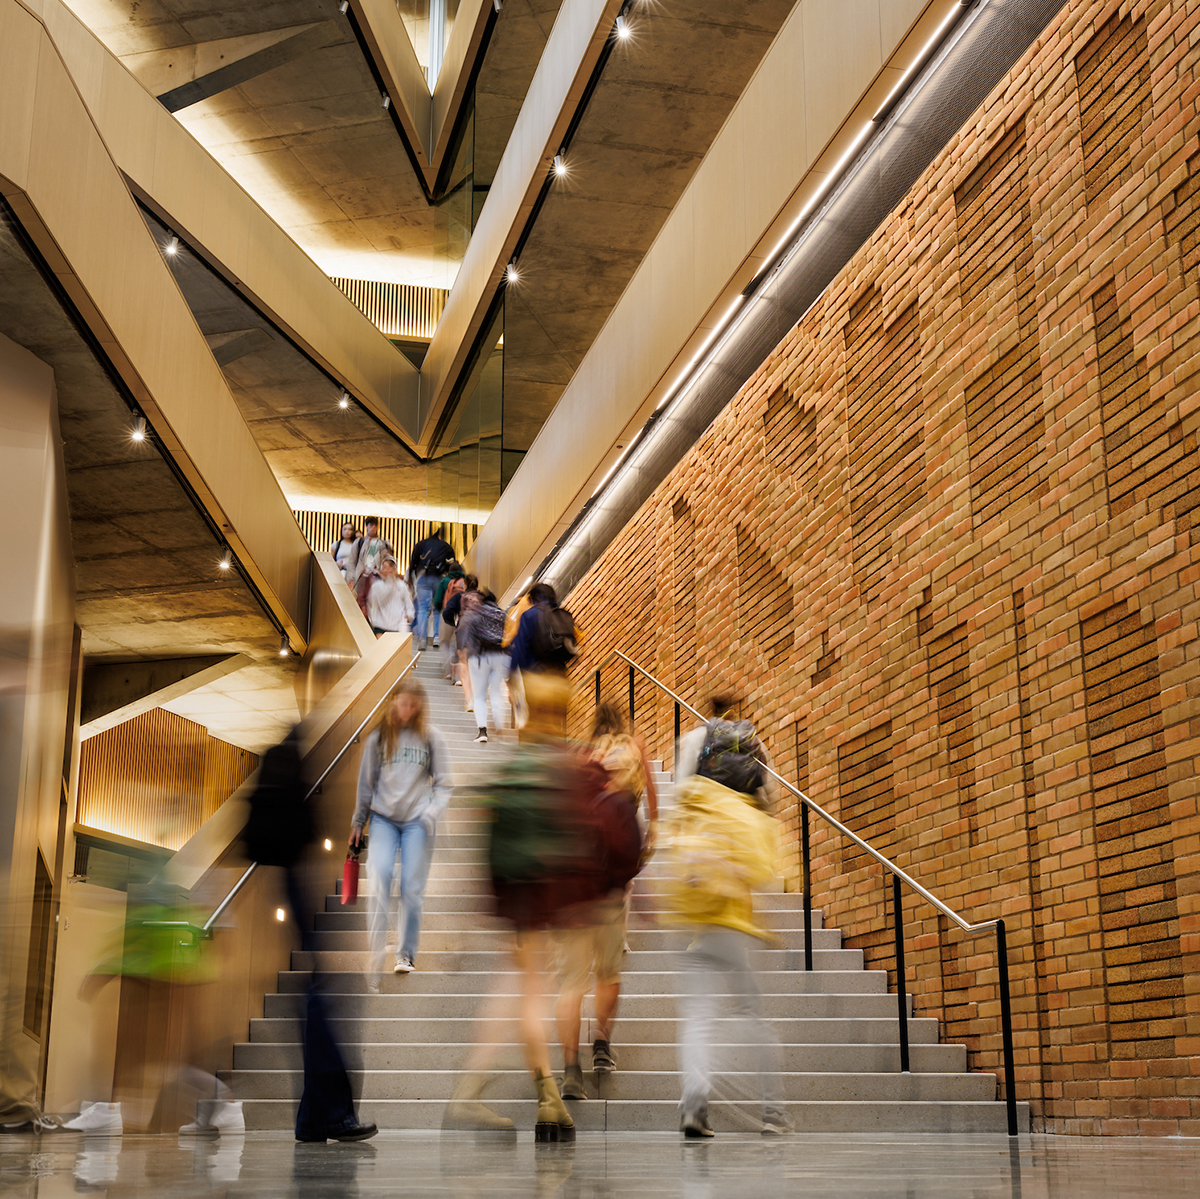 Students head to classes in the new Frost Center at the start of the fall quarter.